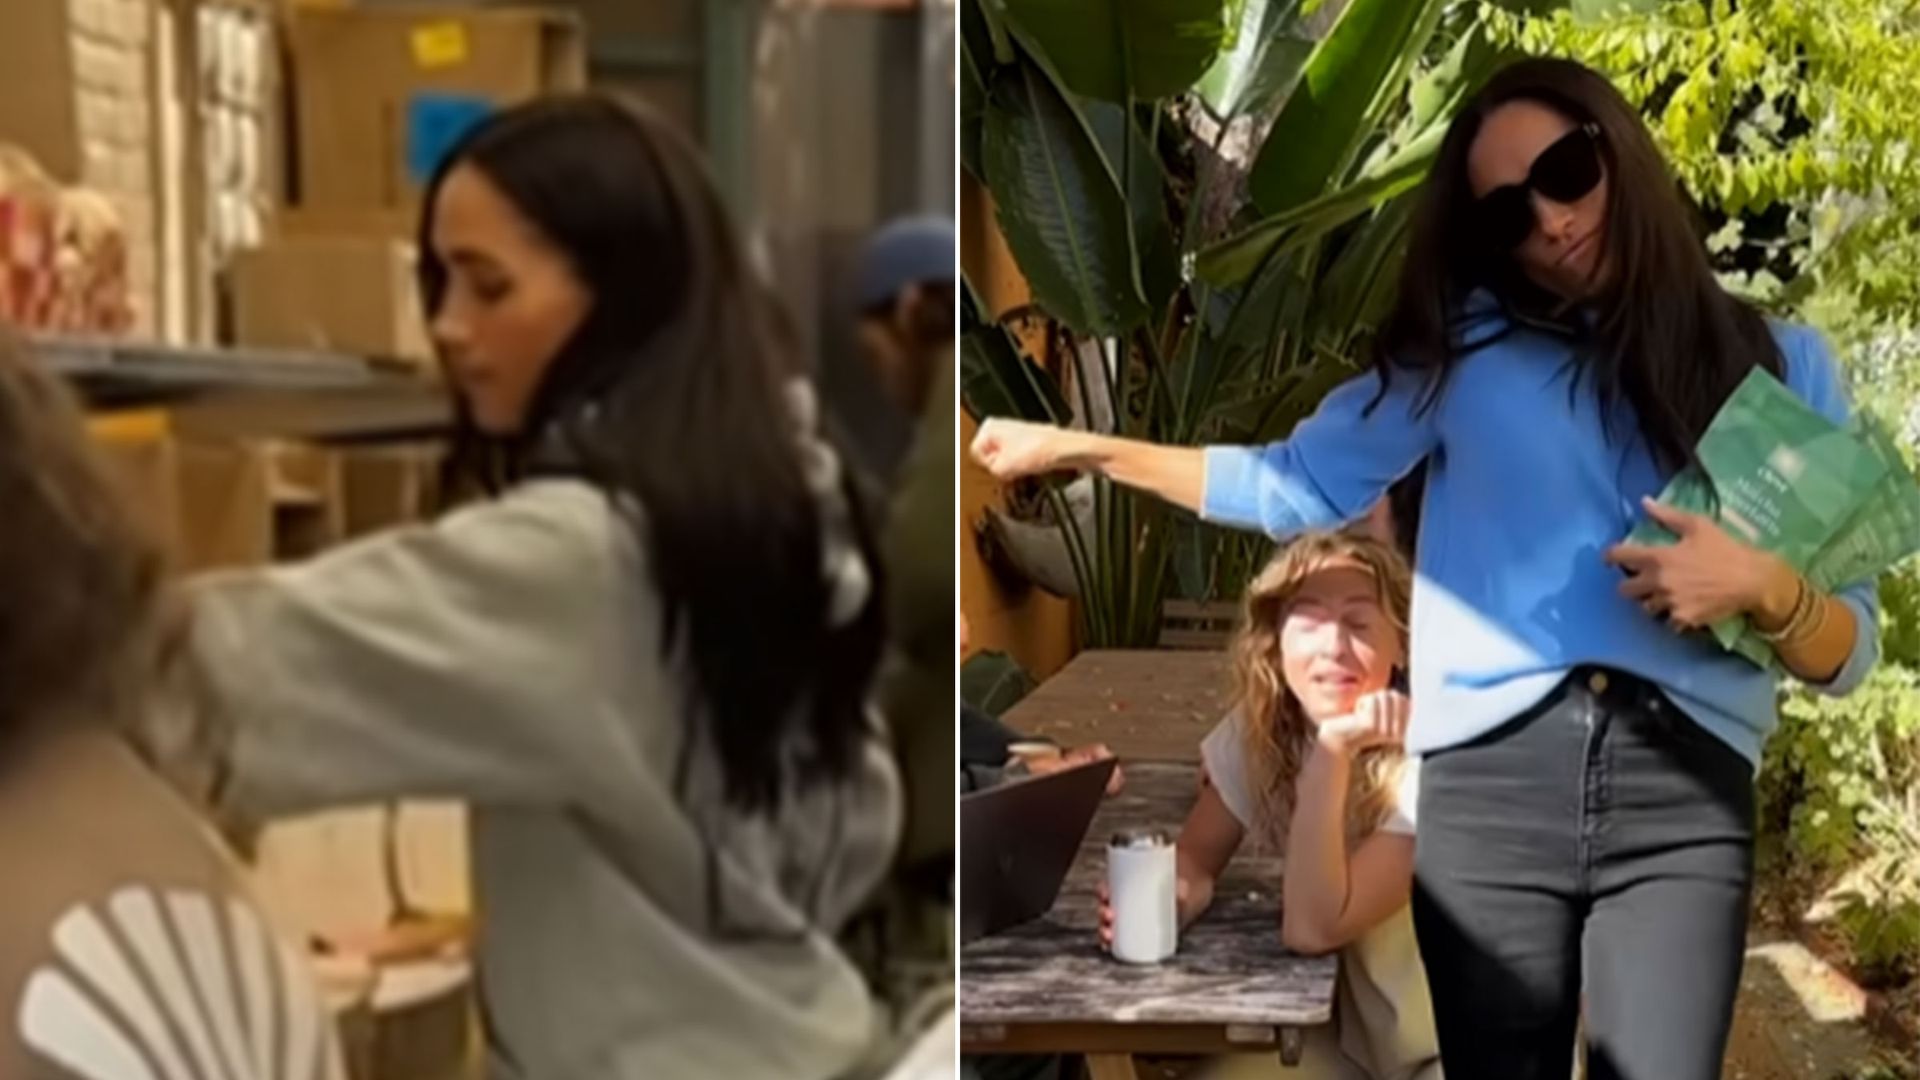 Meghan Markle takes on surprising role as an intern packing boxes in ...